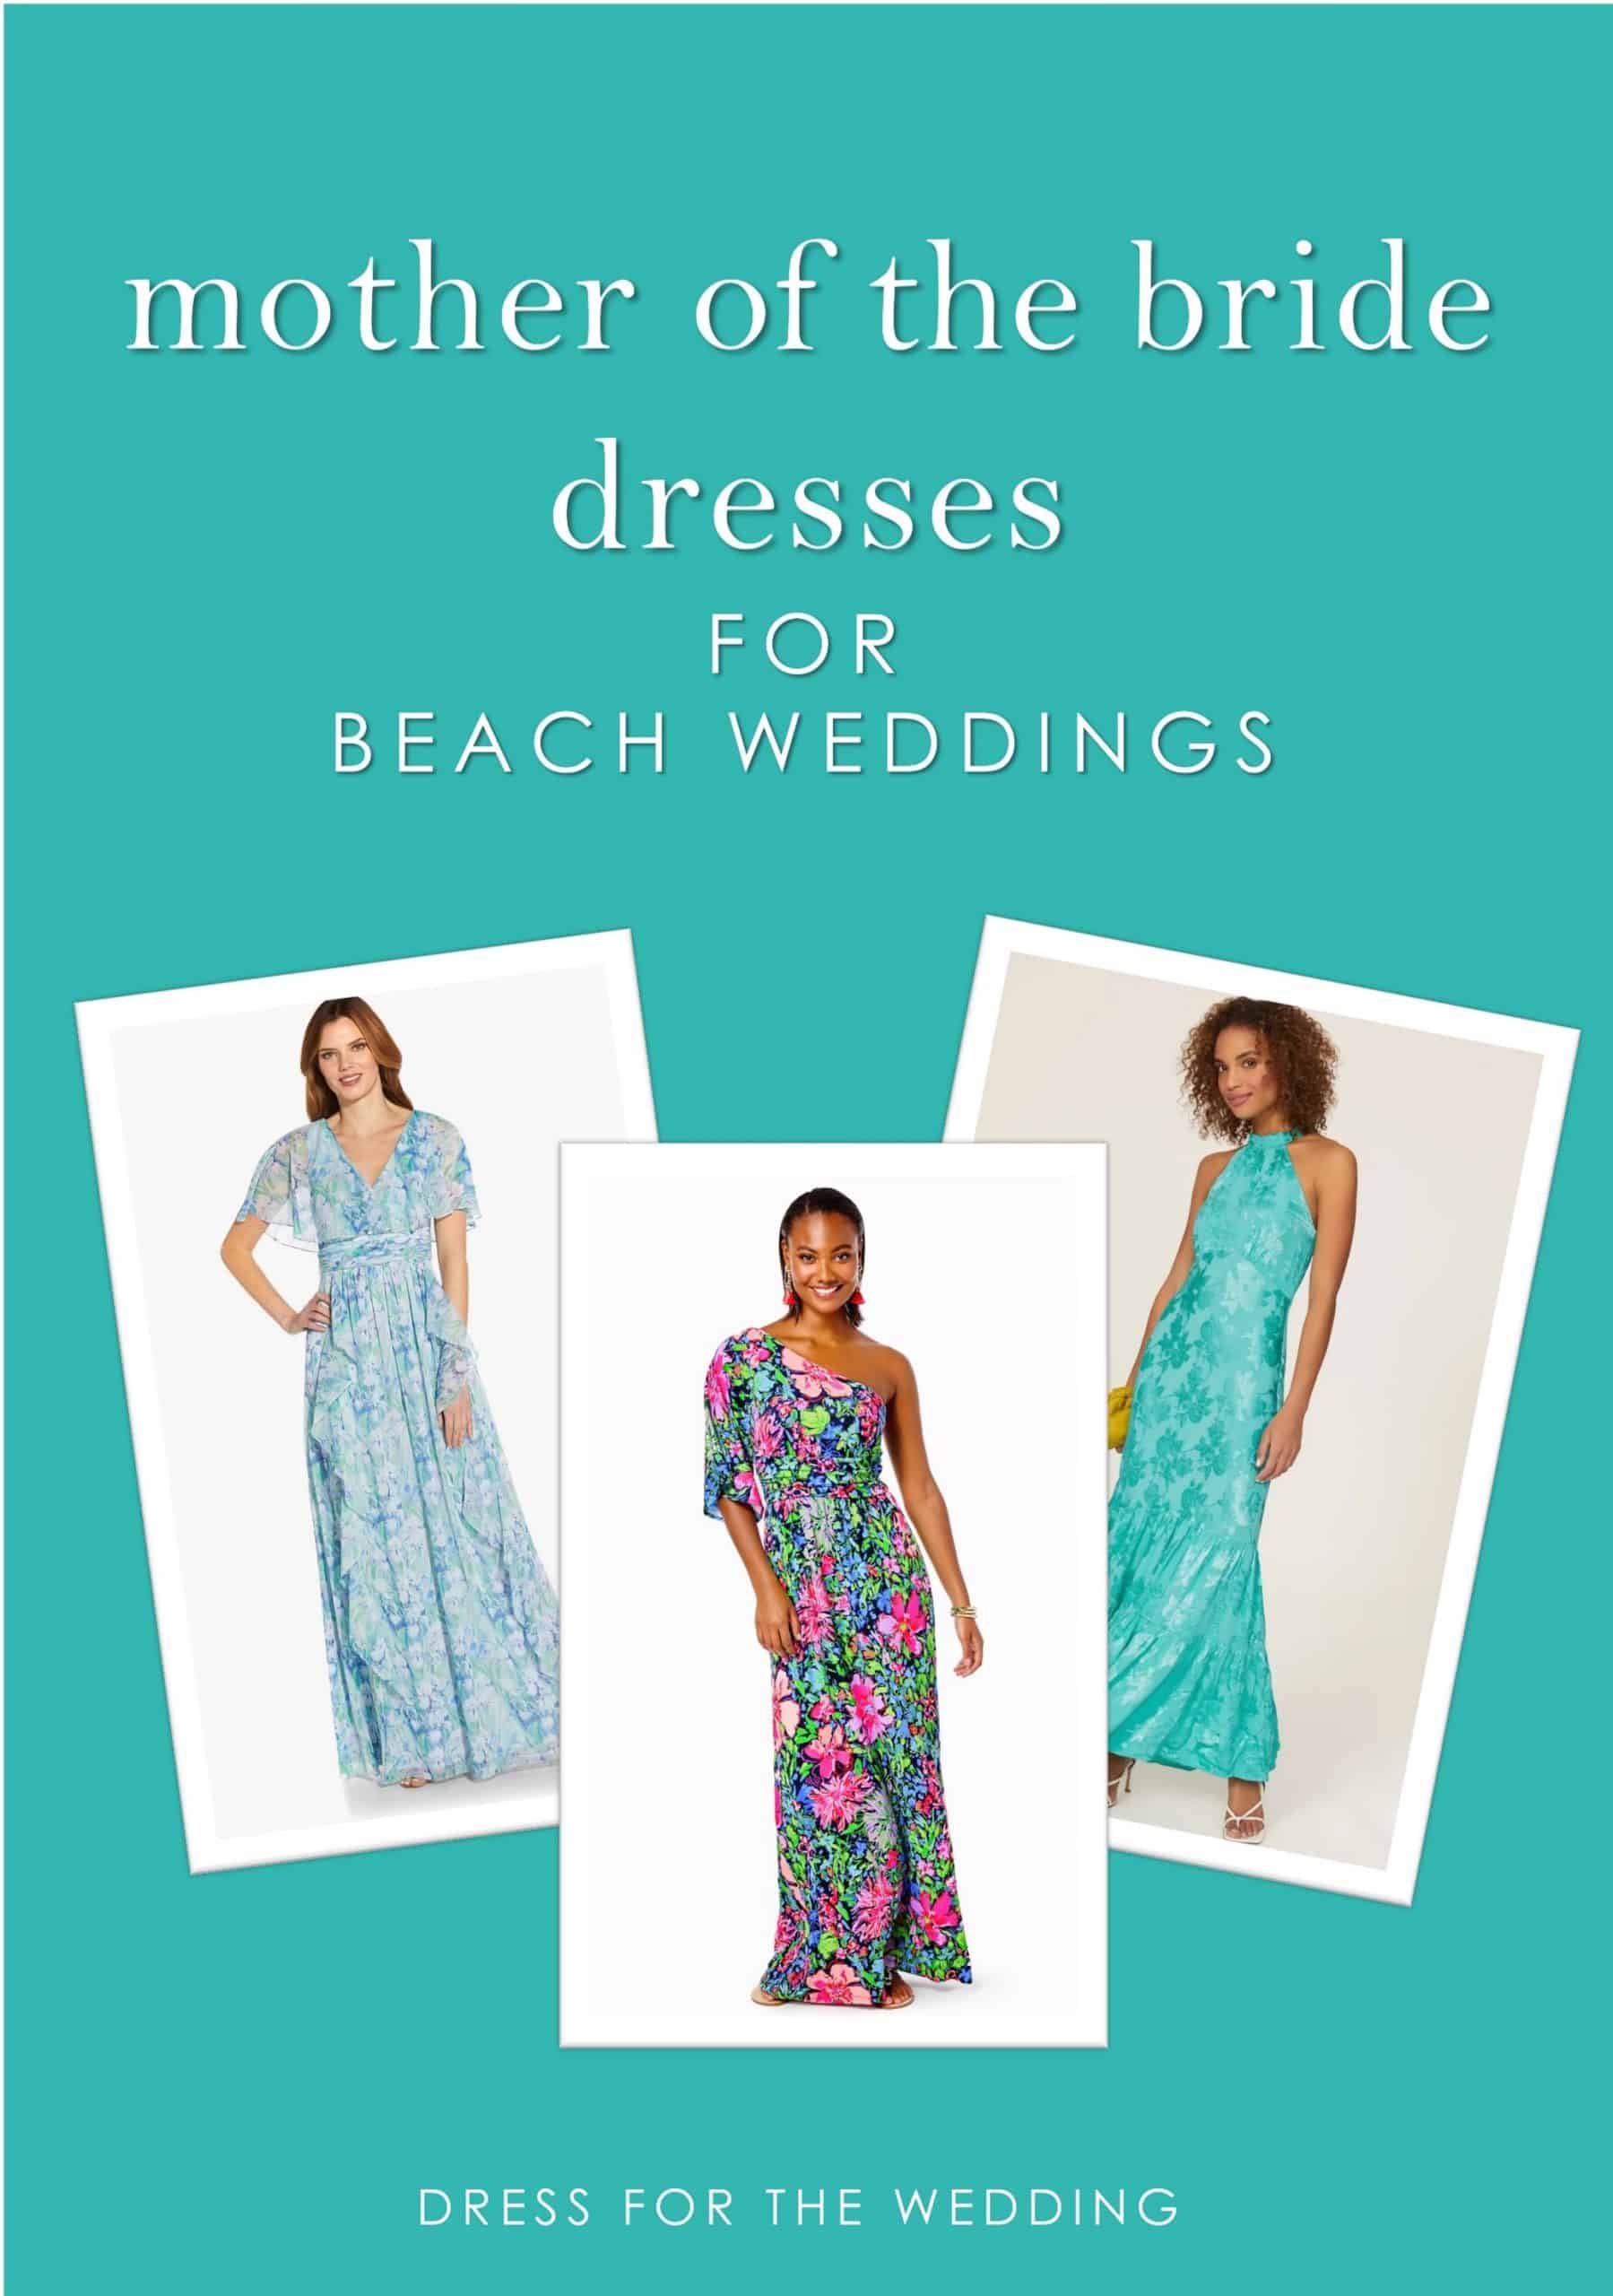 Mother of the Bride Dresses for a Beach Wedding - Dress for the